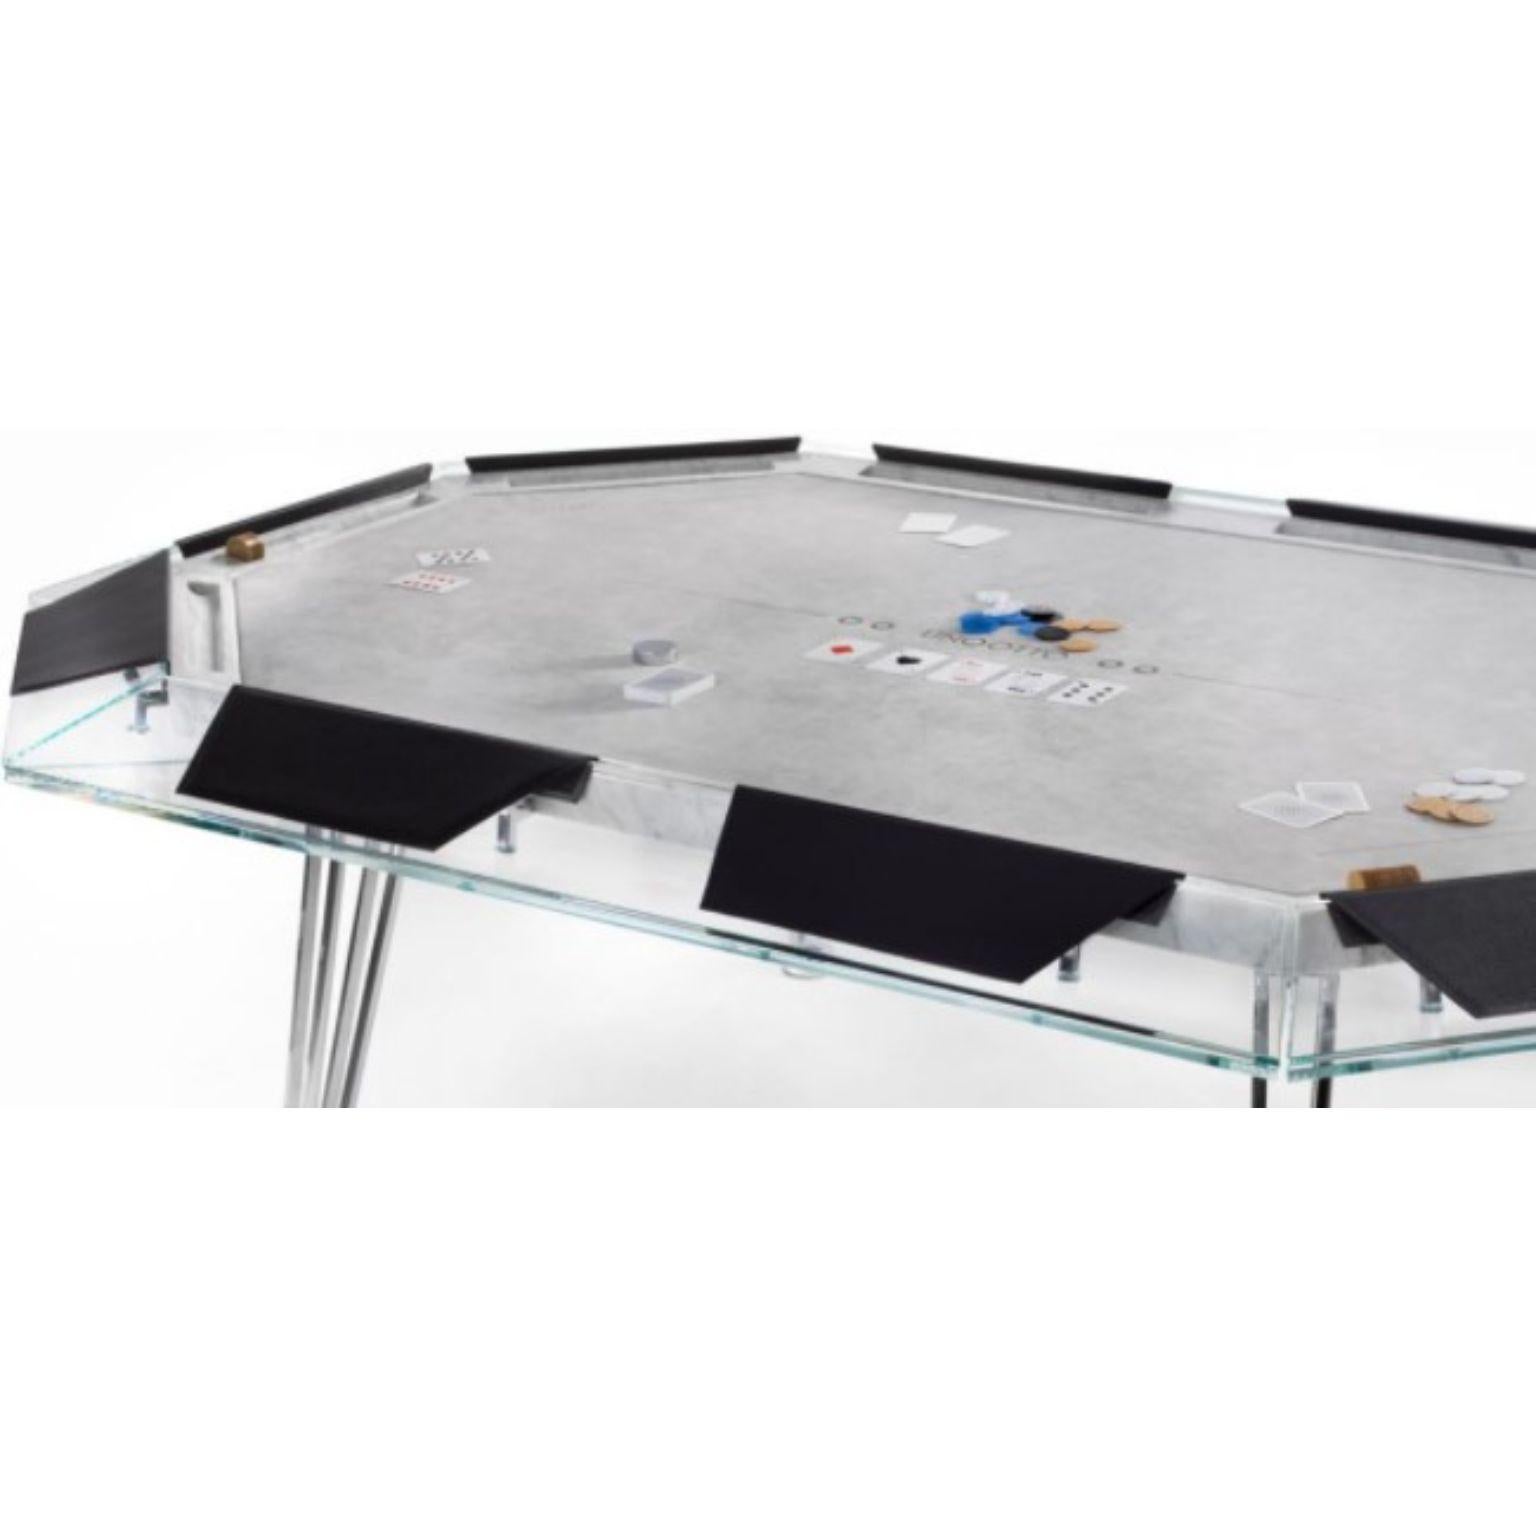 Post-Modern Unootto White Marble 10 Players Poker Table by Impatia